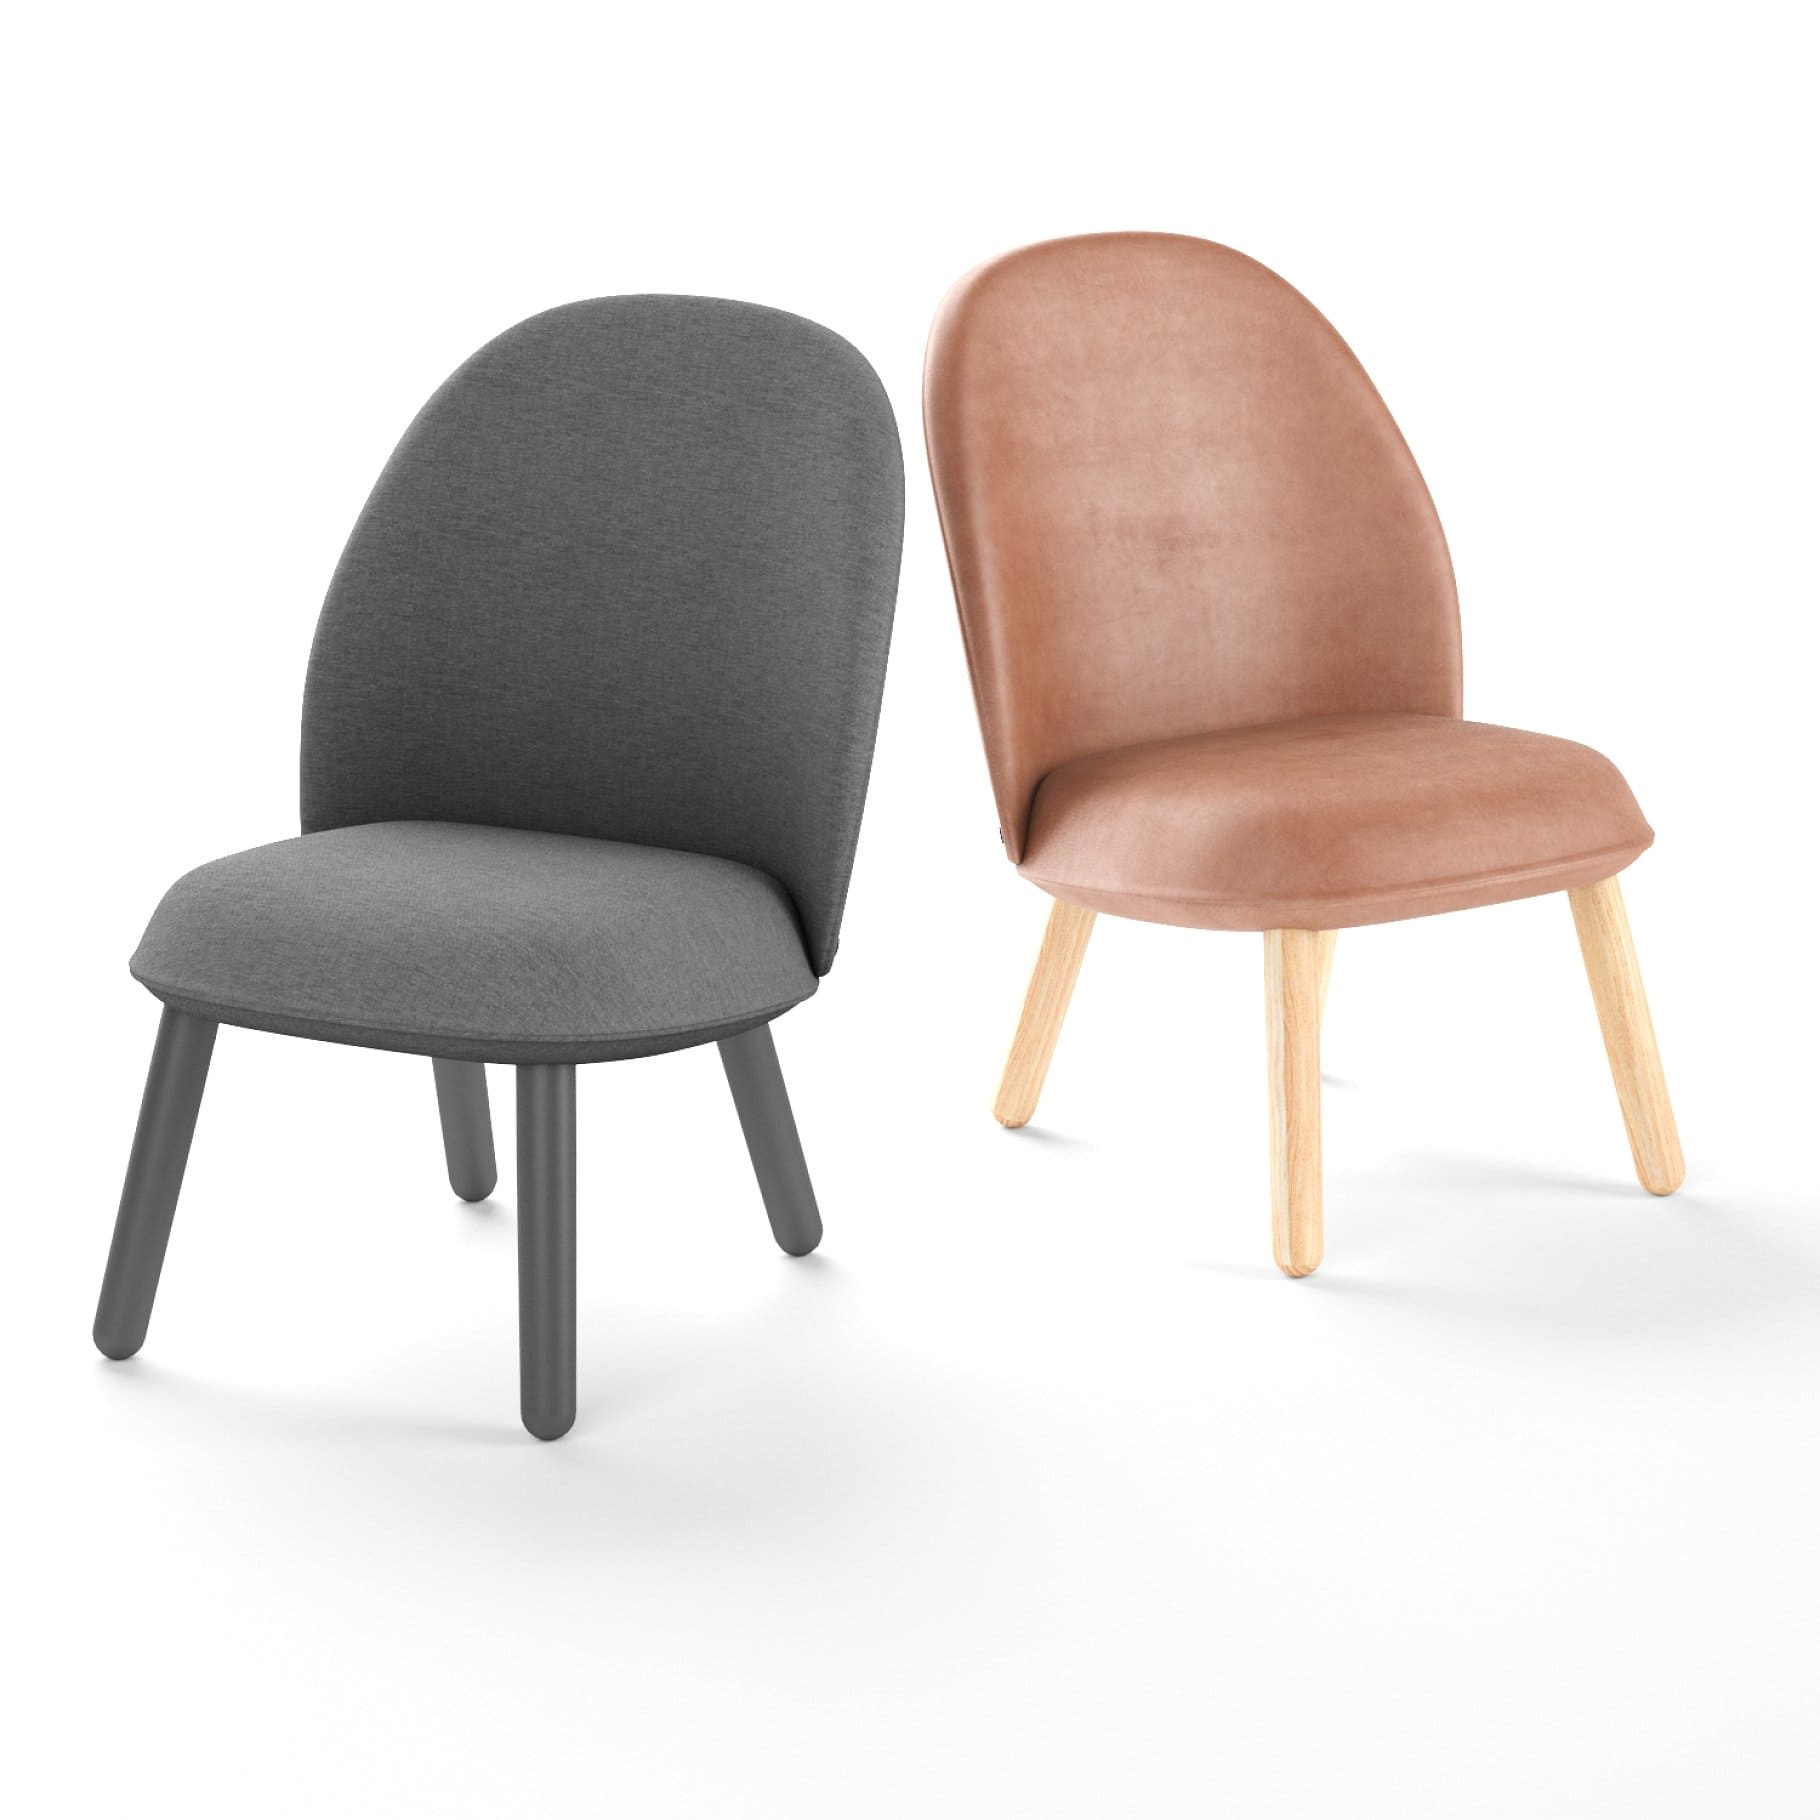 The gray and beige ACE Lounge Chair is upholstered in different materials.